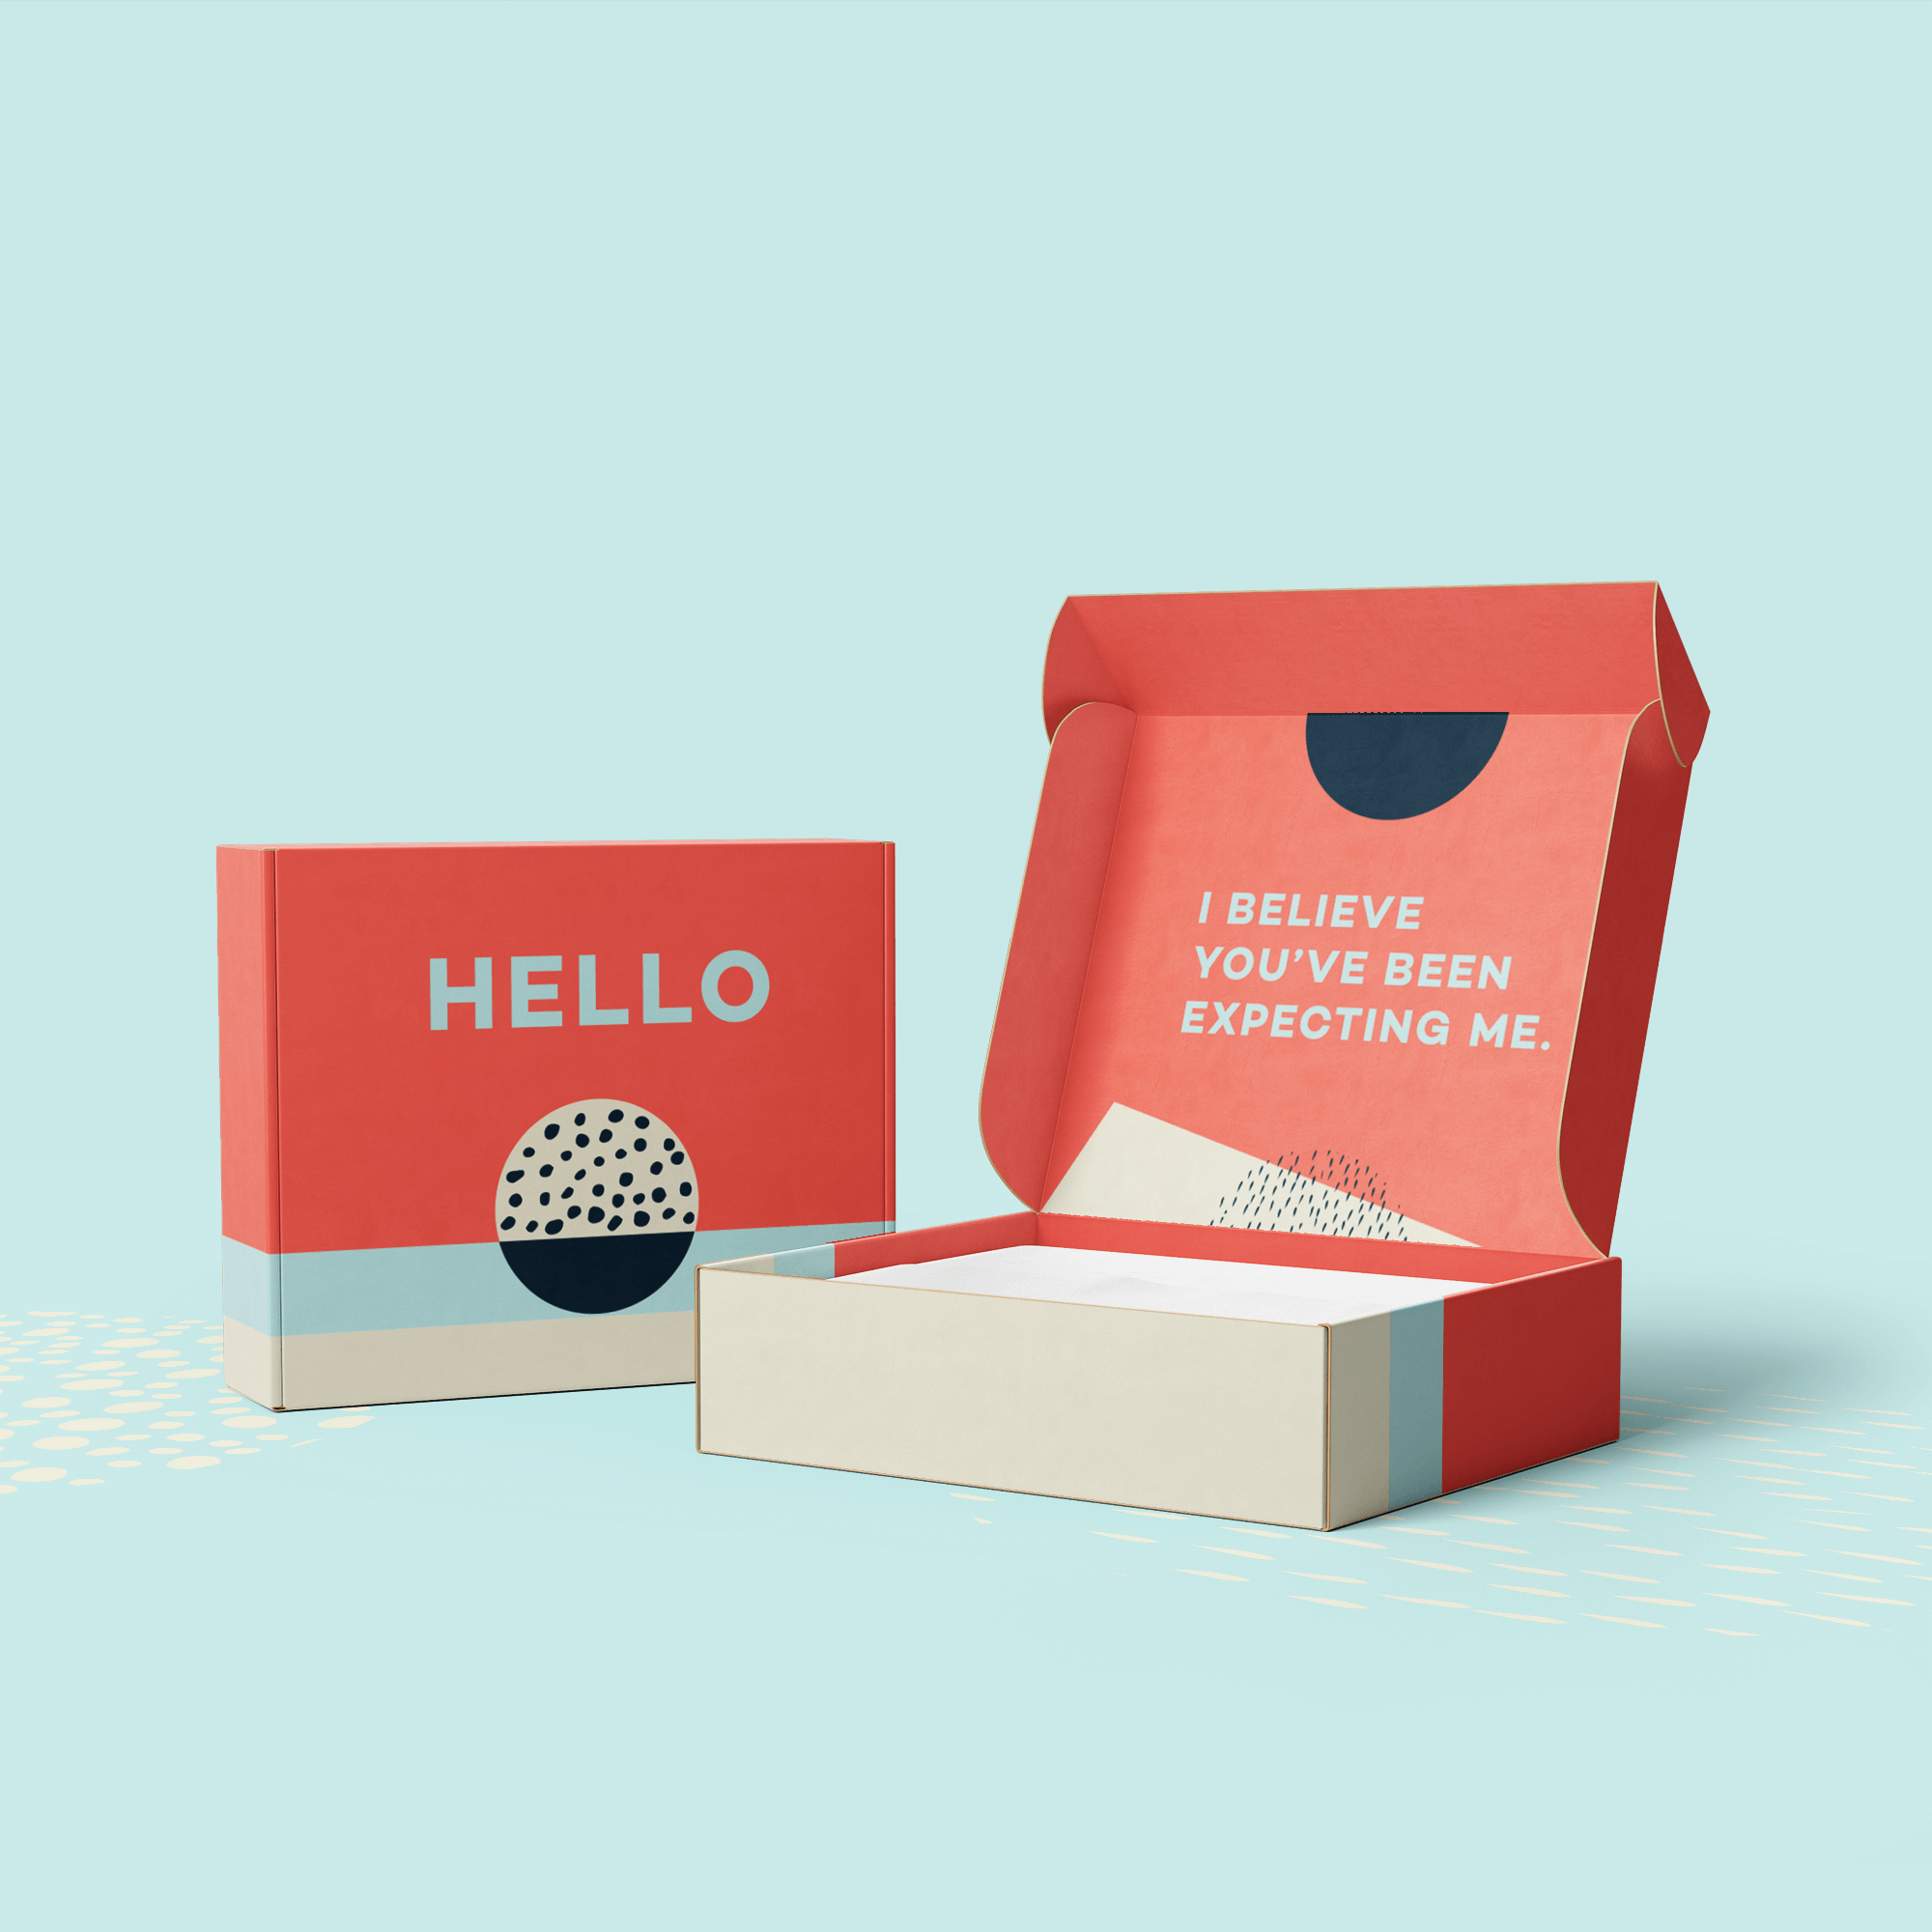 The significance of small-sized mailer Boxes to the Success of Big Brands